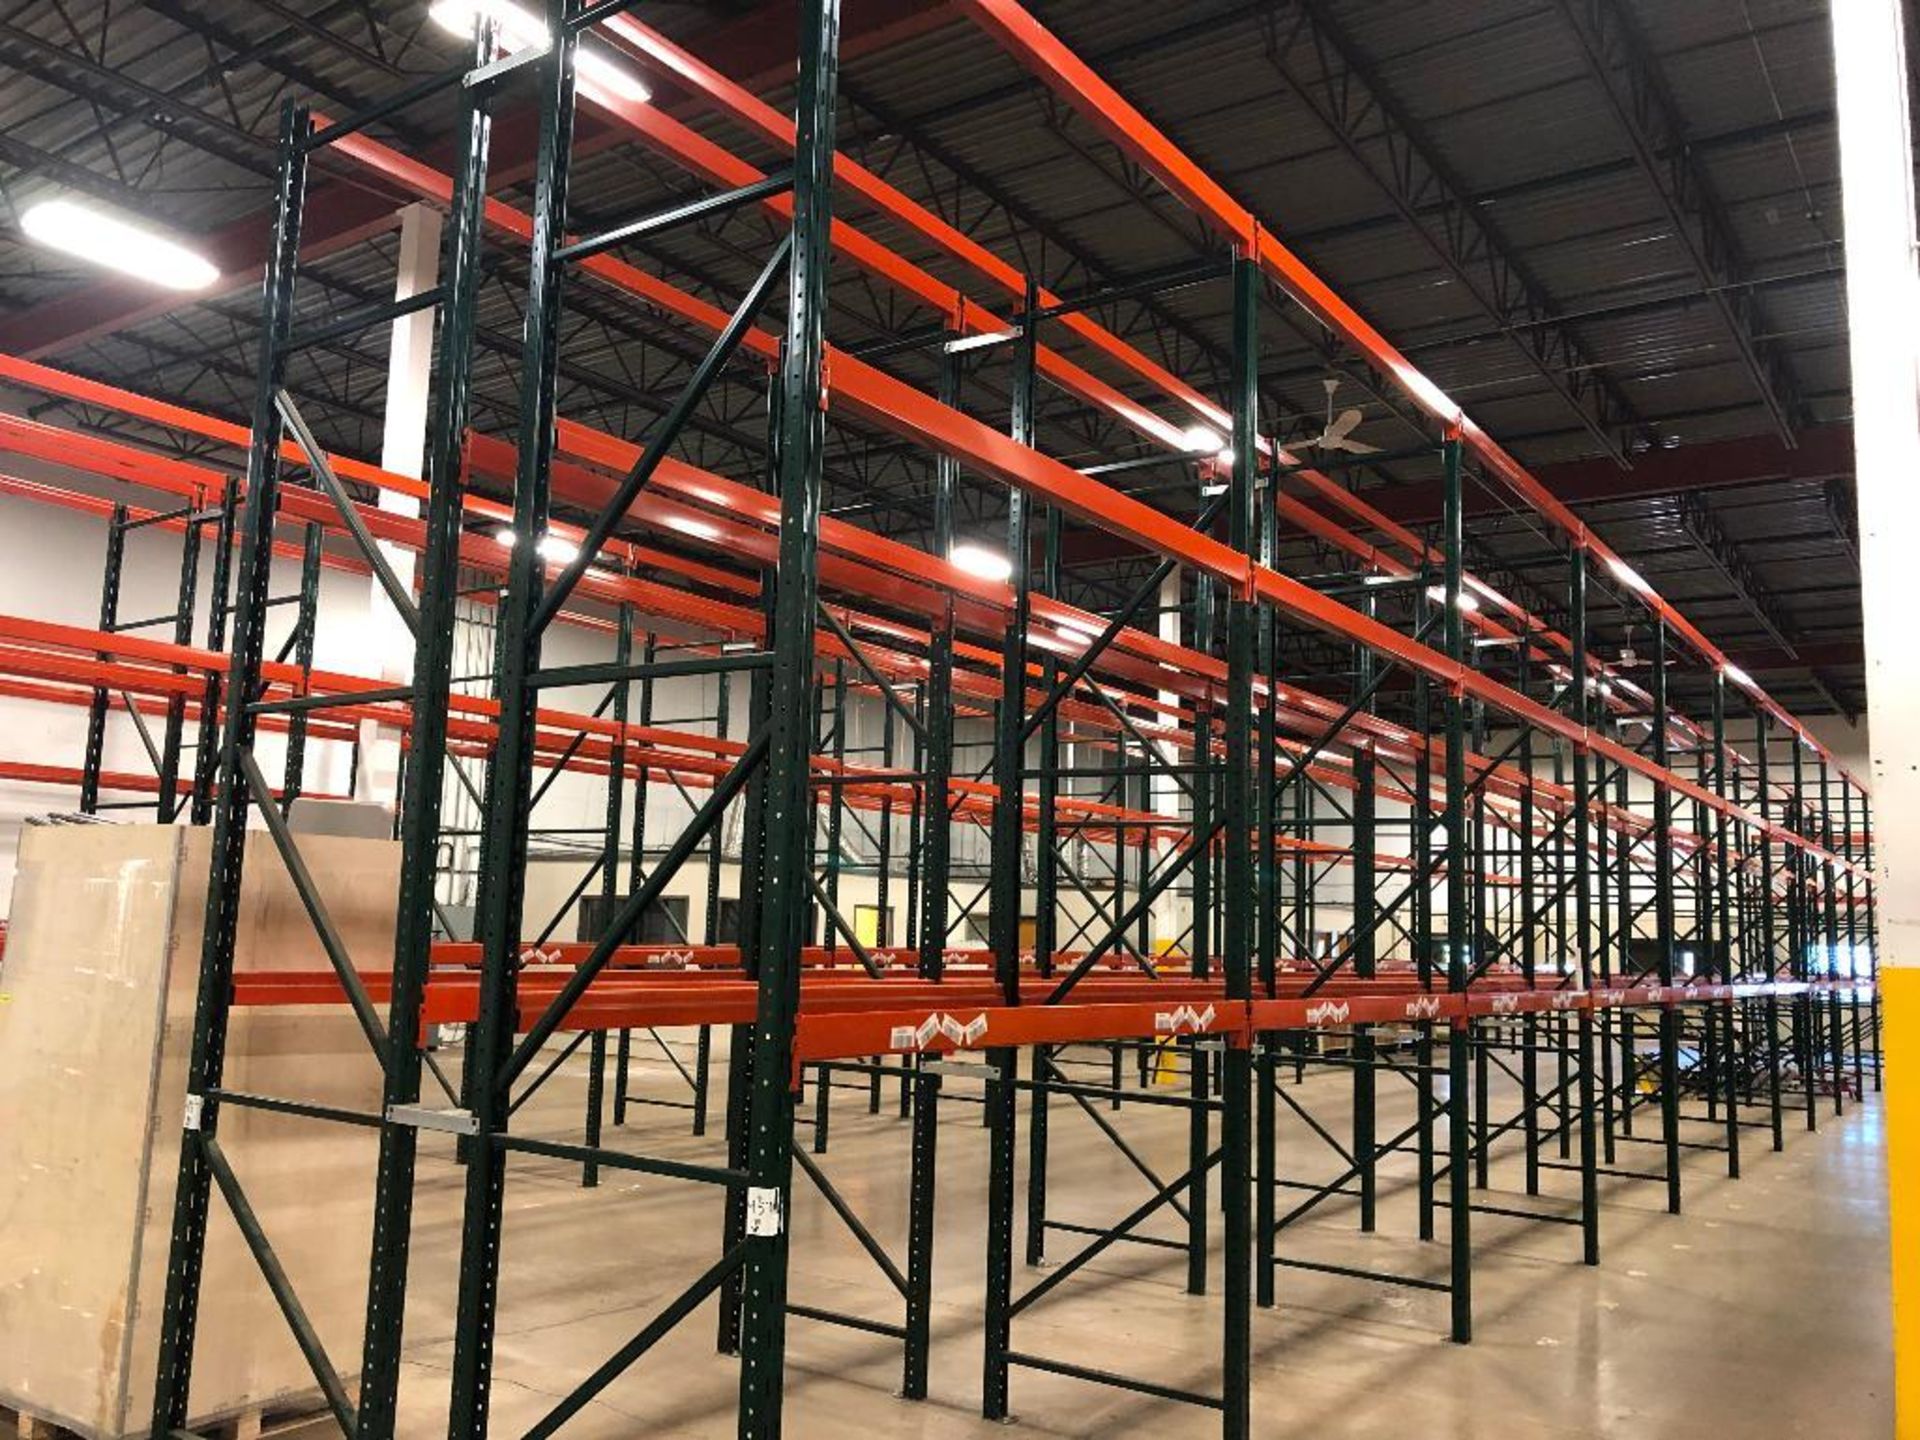 DESCRIPTION: (12) SECTIONS OF 9' X 3' X 15' PALLET RACKING ADDITIONAL INFORMATION: W/ (13) UPRIGHTS,